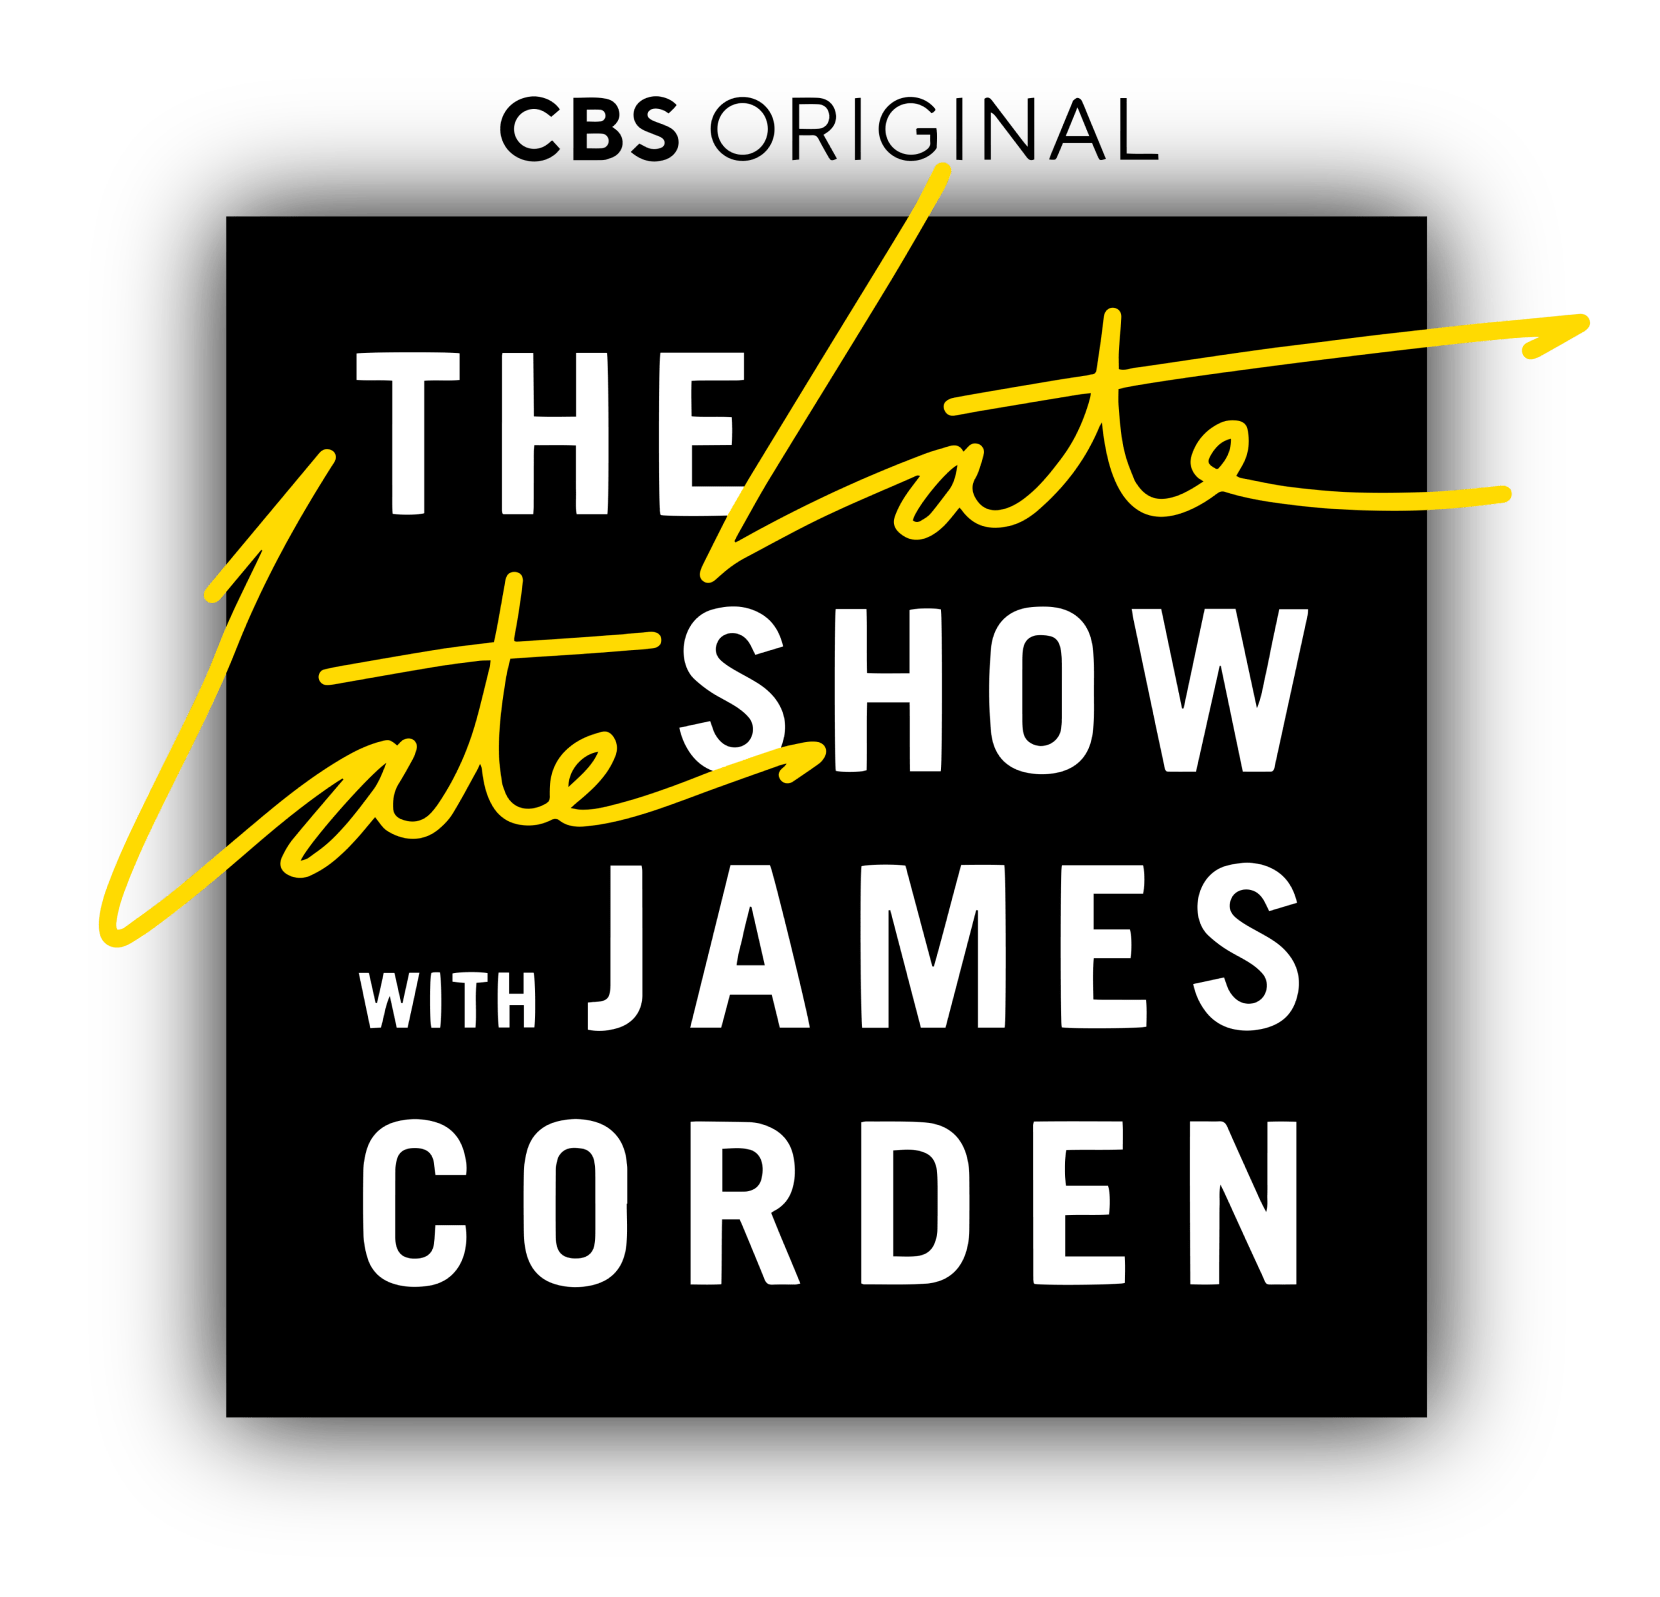 
the-late-late-show-with-james-corden-logo